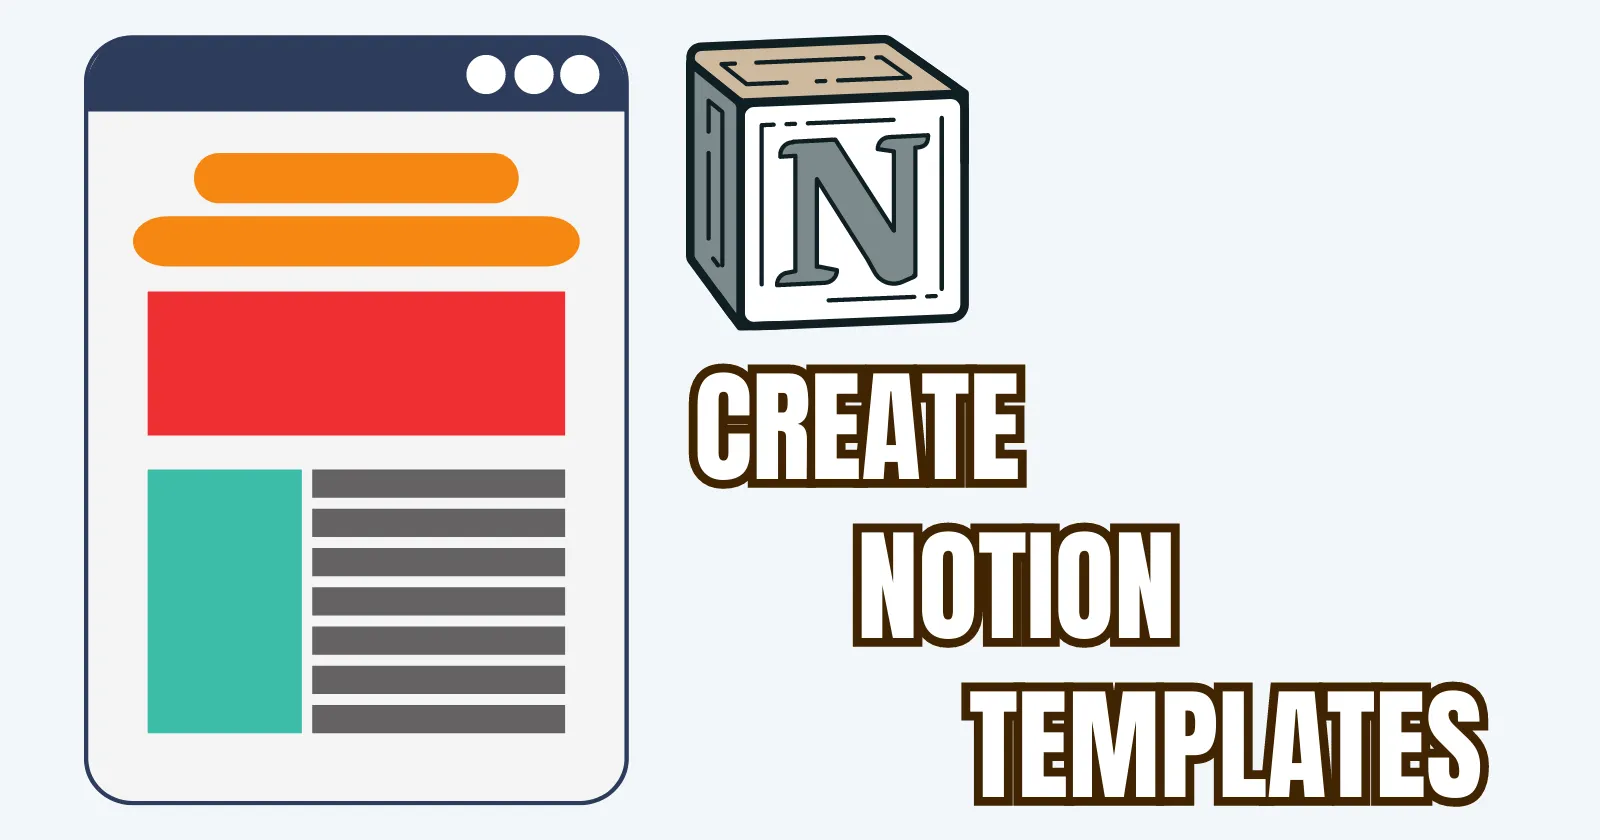 How to Create a Template in Notion